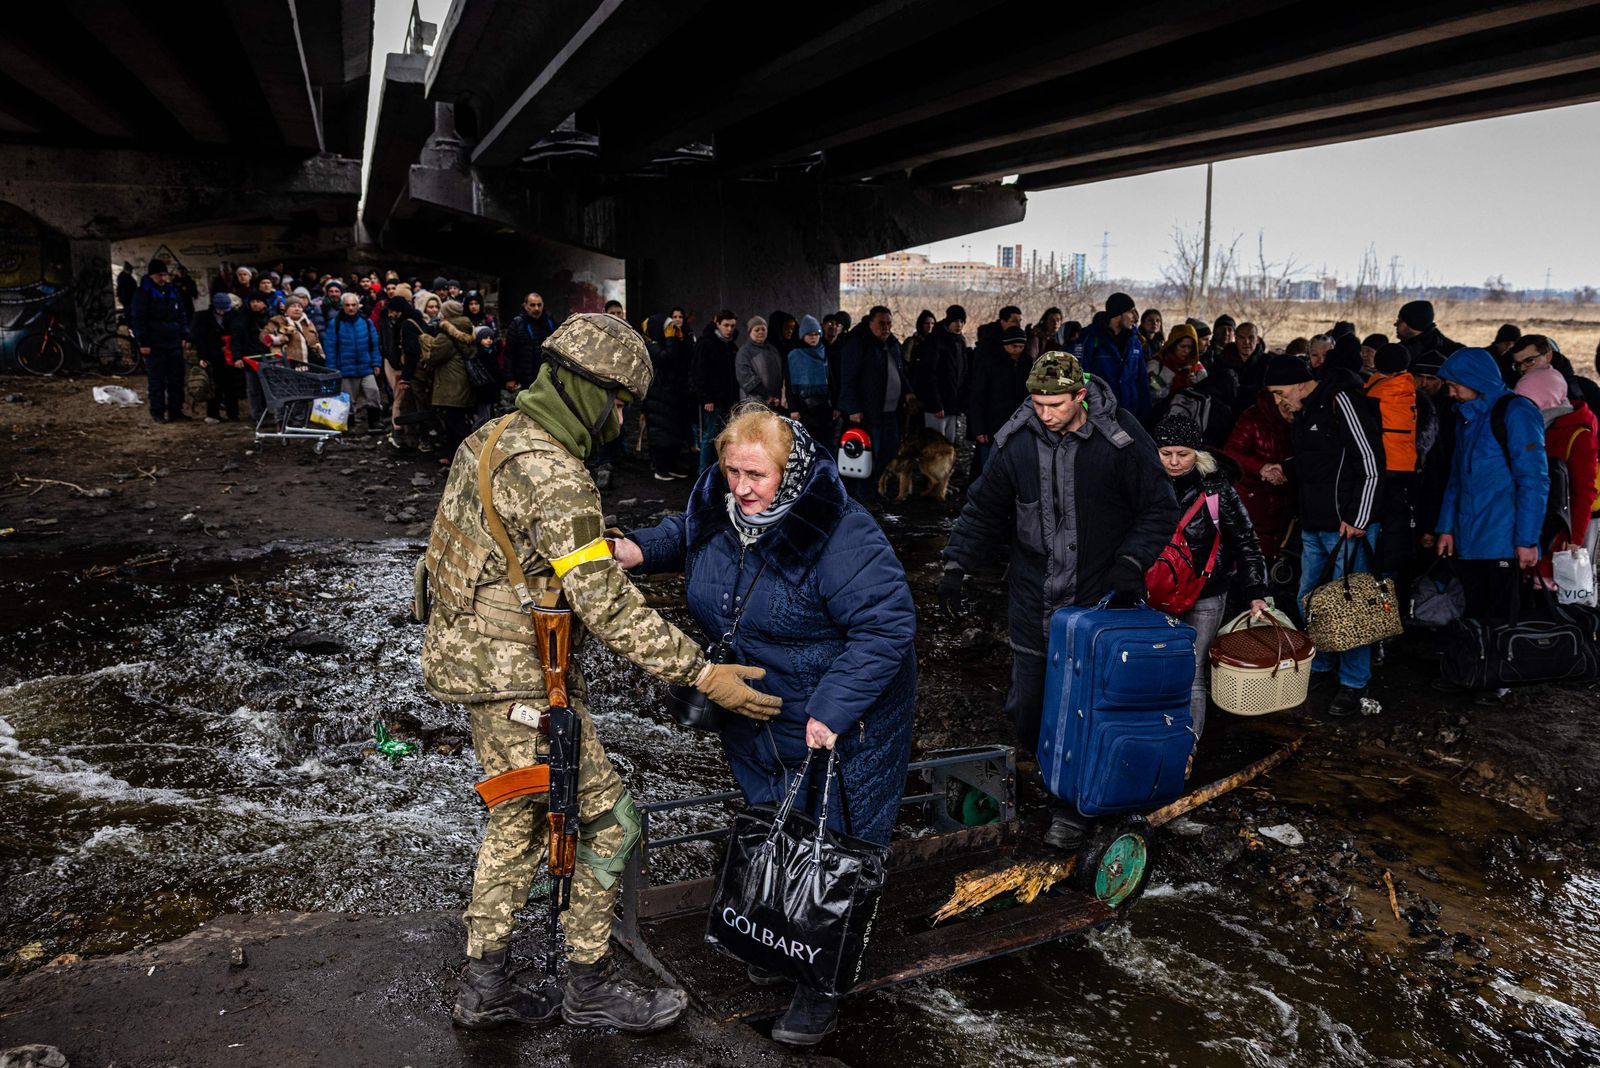 A Ukrainian serviceman helps evacuees gathered under a destroyed bridge, as they flee the city of Irpin, northwest of Kyiv, on March 7, 2022. - Ukraine dismissed Moscow's offer to set up humanitarian corridors from several bombarded cities on March 7, 2022, after it emerged some routes would lead refugees into Russia or Belarus. The Russian proposal of safe passage from Kharkiv, Kyiv, Mariupol and Sumy had come after terrified Ukrainian civilians came under fire in previous ceasefire attempts. (Photo by Dimitar DILKOFF / AFP) - AFP